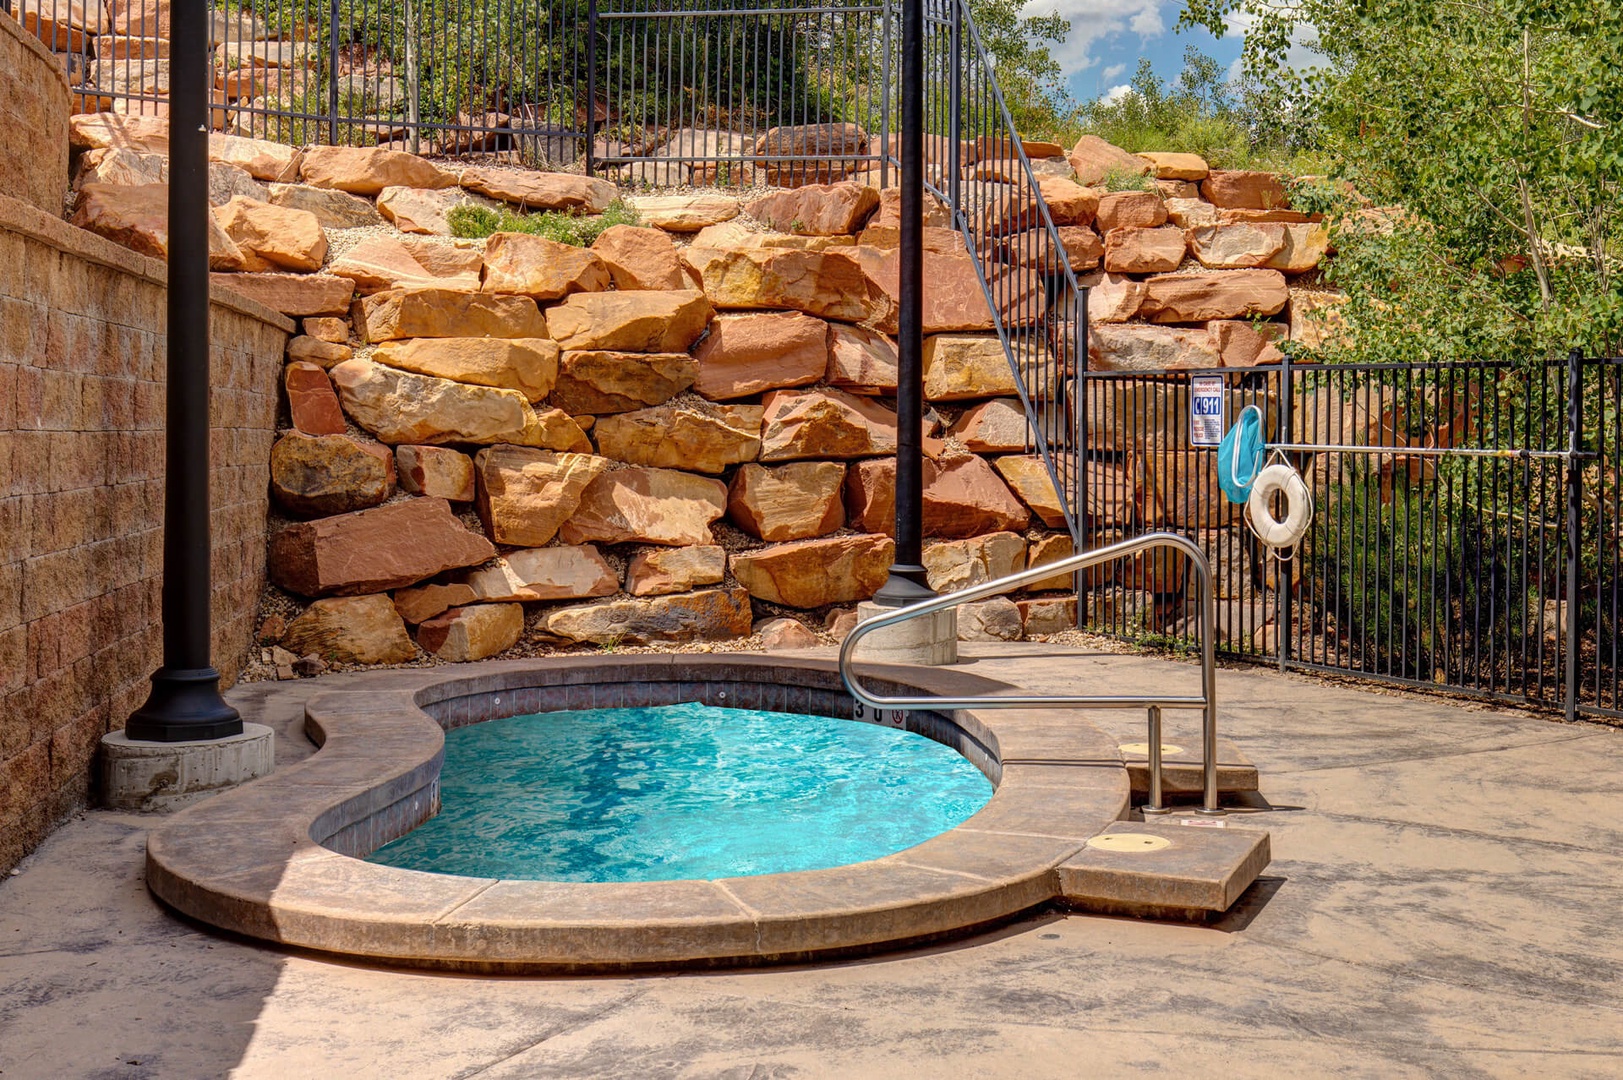 Bear Hollow Lodges Hot Tub: Open all year